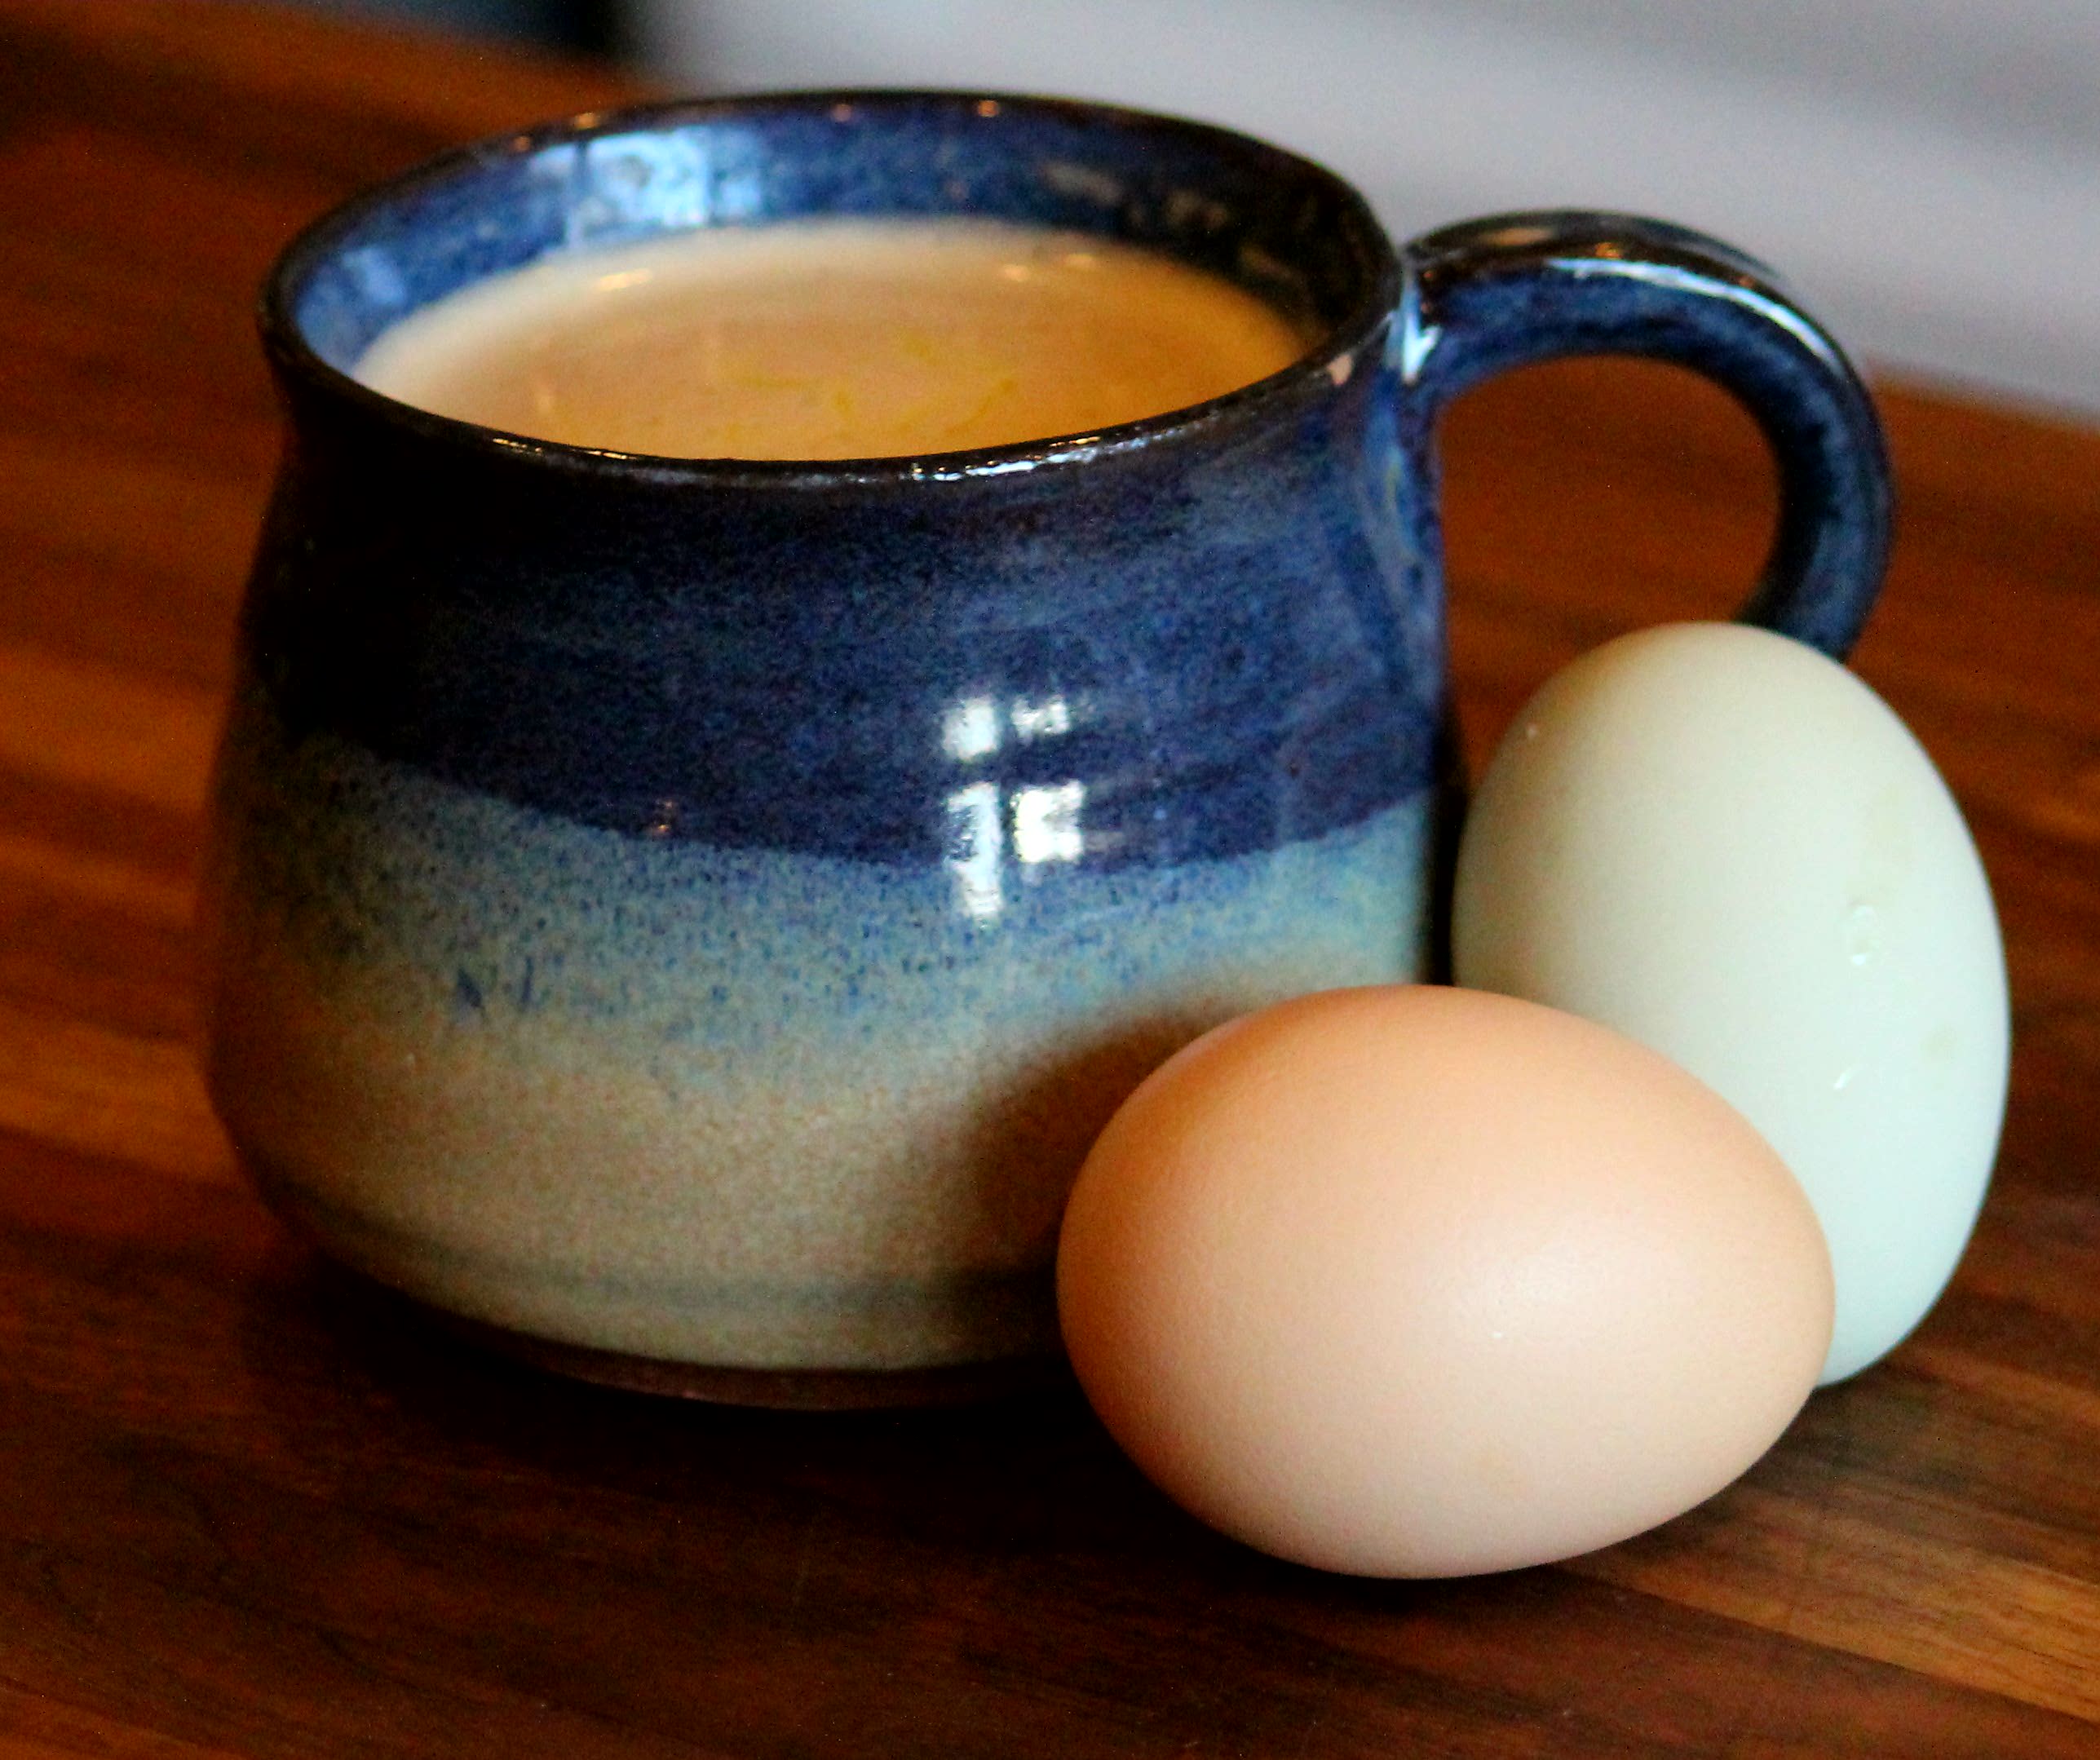 Egg Yolk Coffee.  Yup it’s a Thing!  And it’s Awesome!